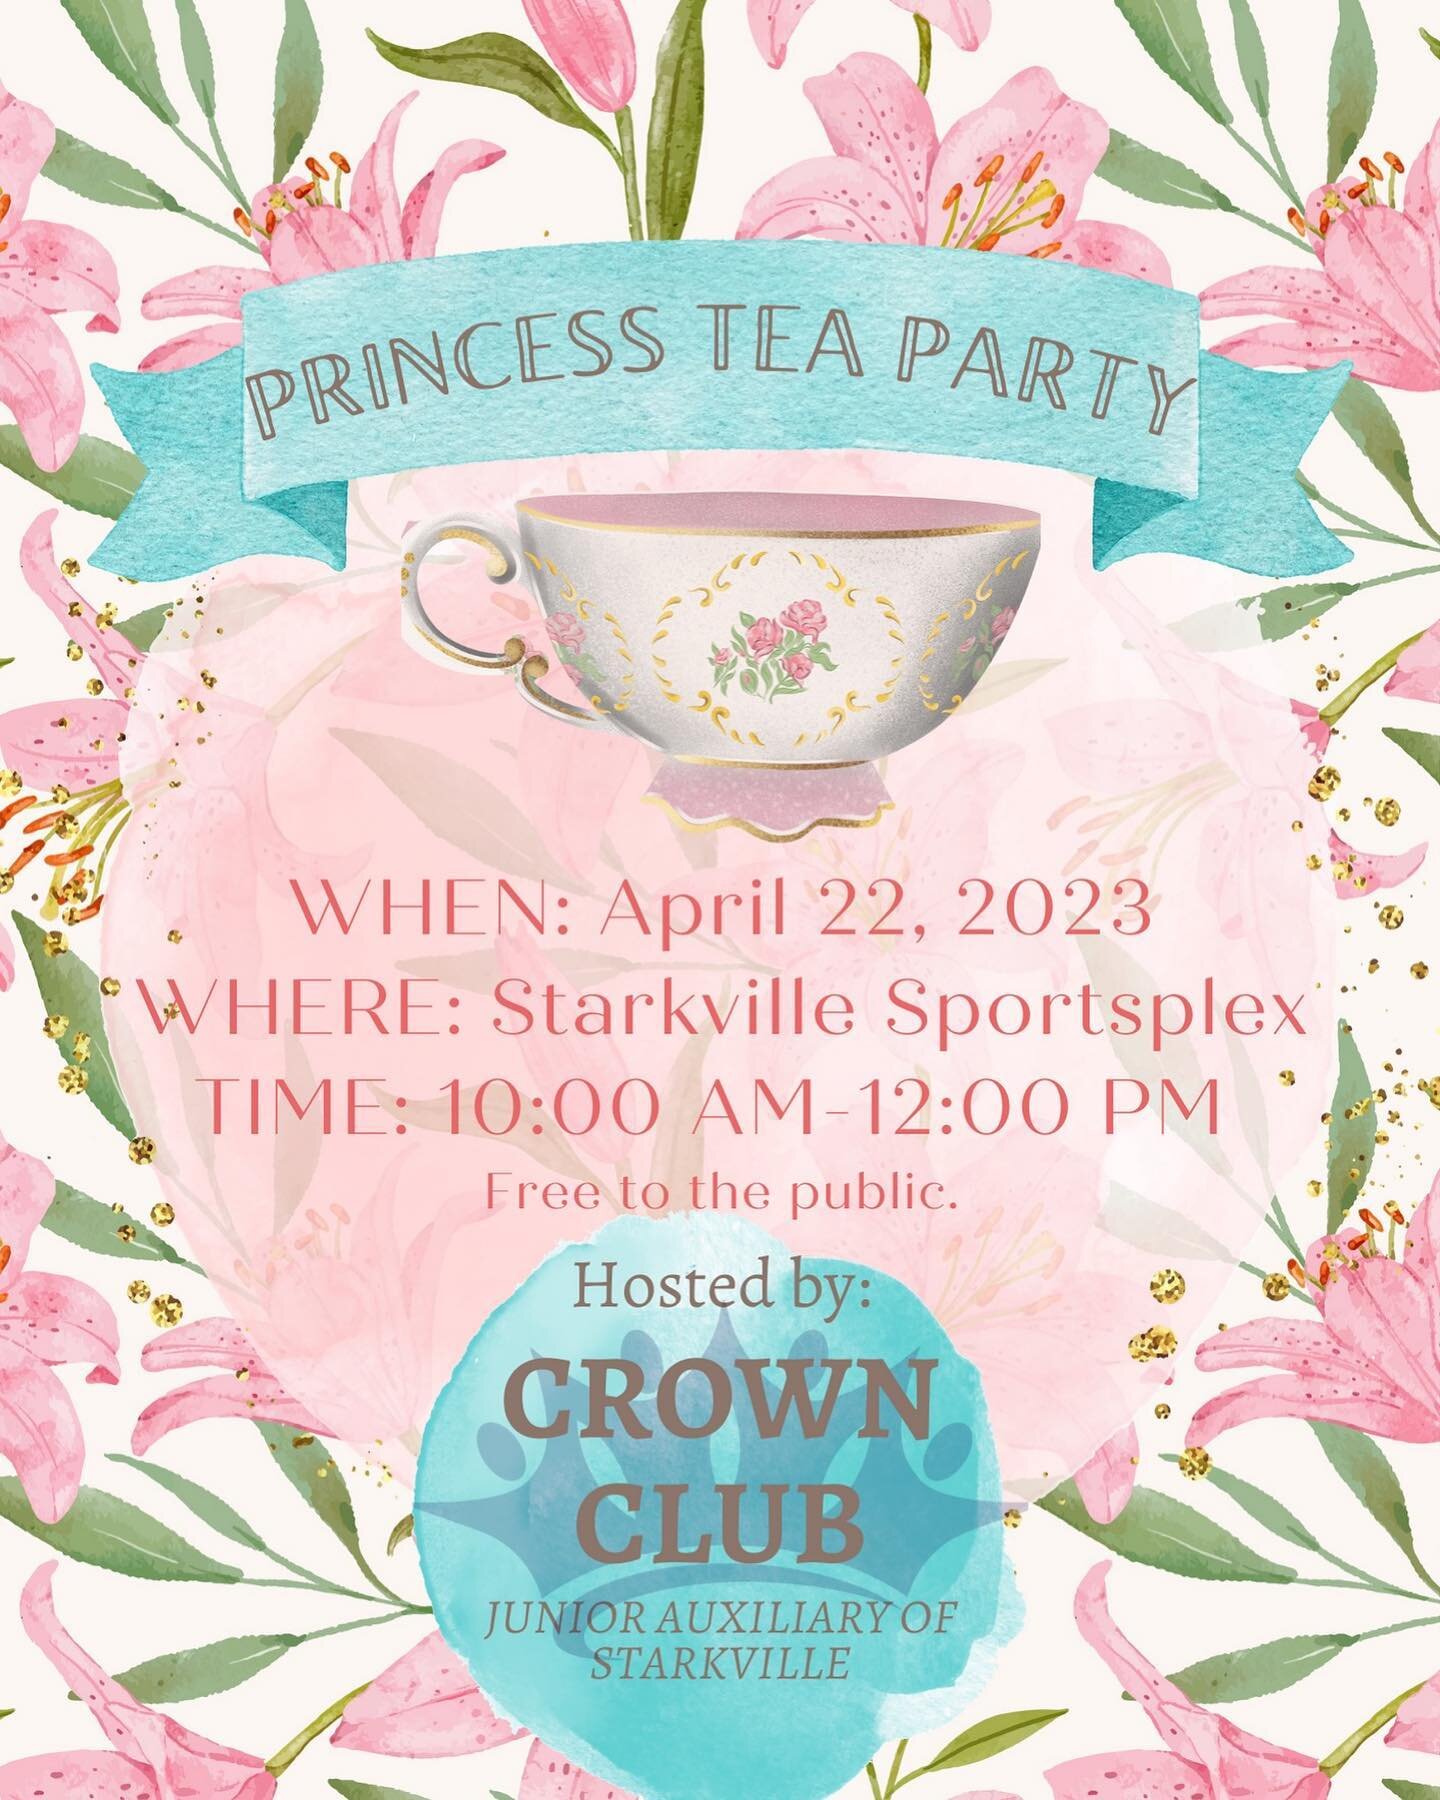 Crown Club is excited to announce the annual Princess Tea Party will be held Saturday, April 22, 2023, at the Starkville Sportsplex from 10:00 AM- 12:00 PM! We can&rsquo;t wait to see you there for this event that is free to the public!